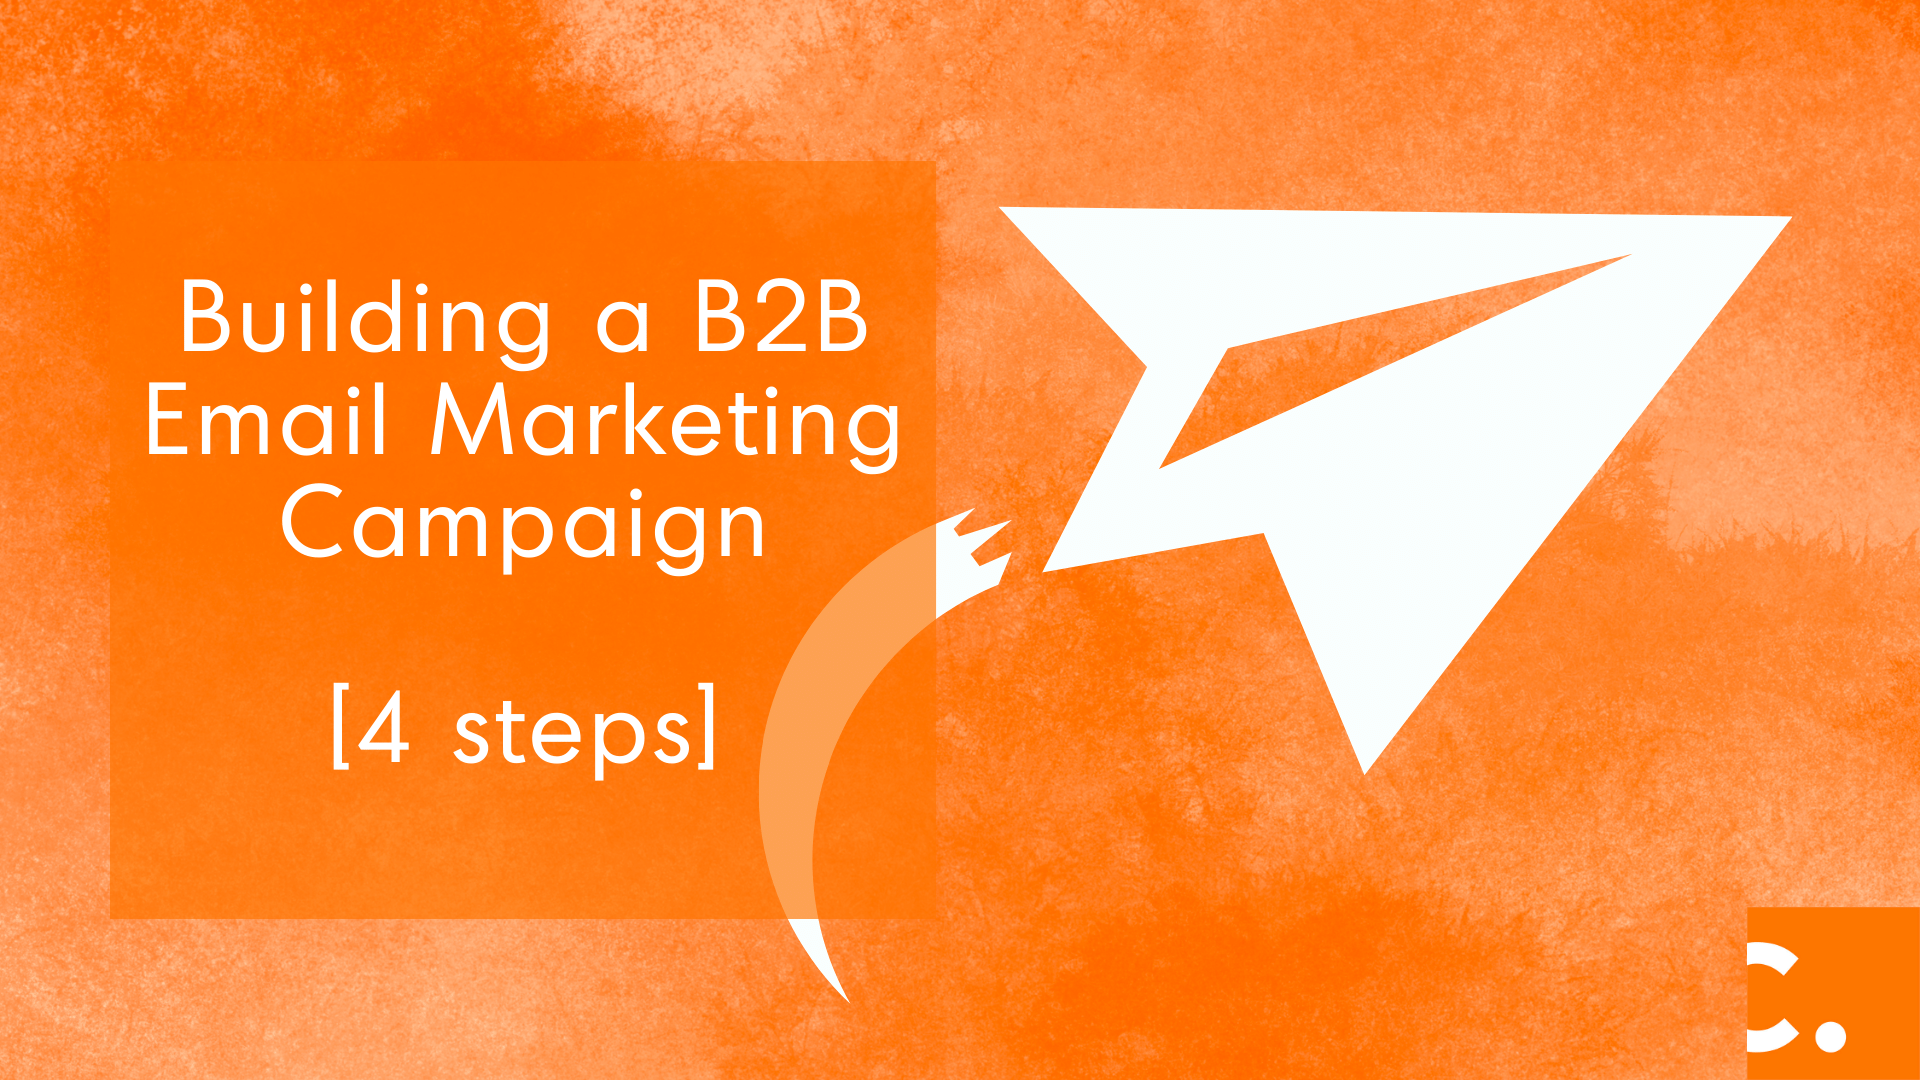 Building a B2B Email Marketing Campaign [4 steps]